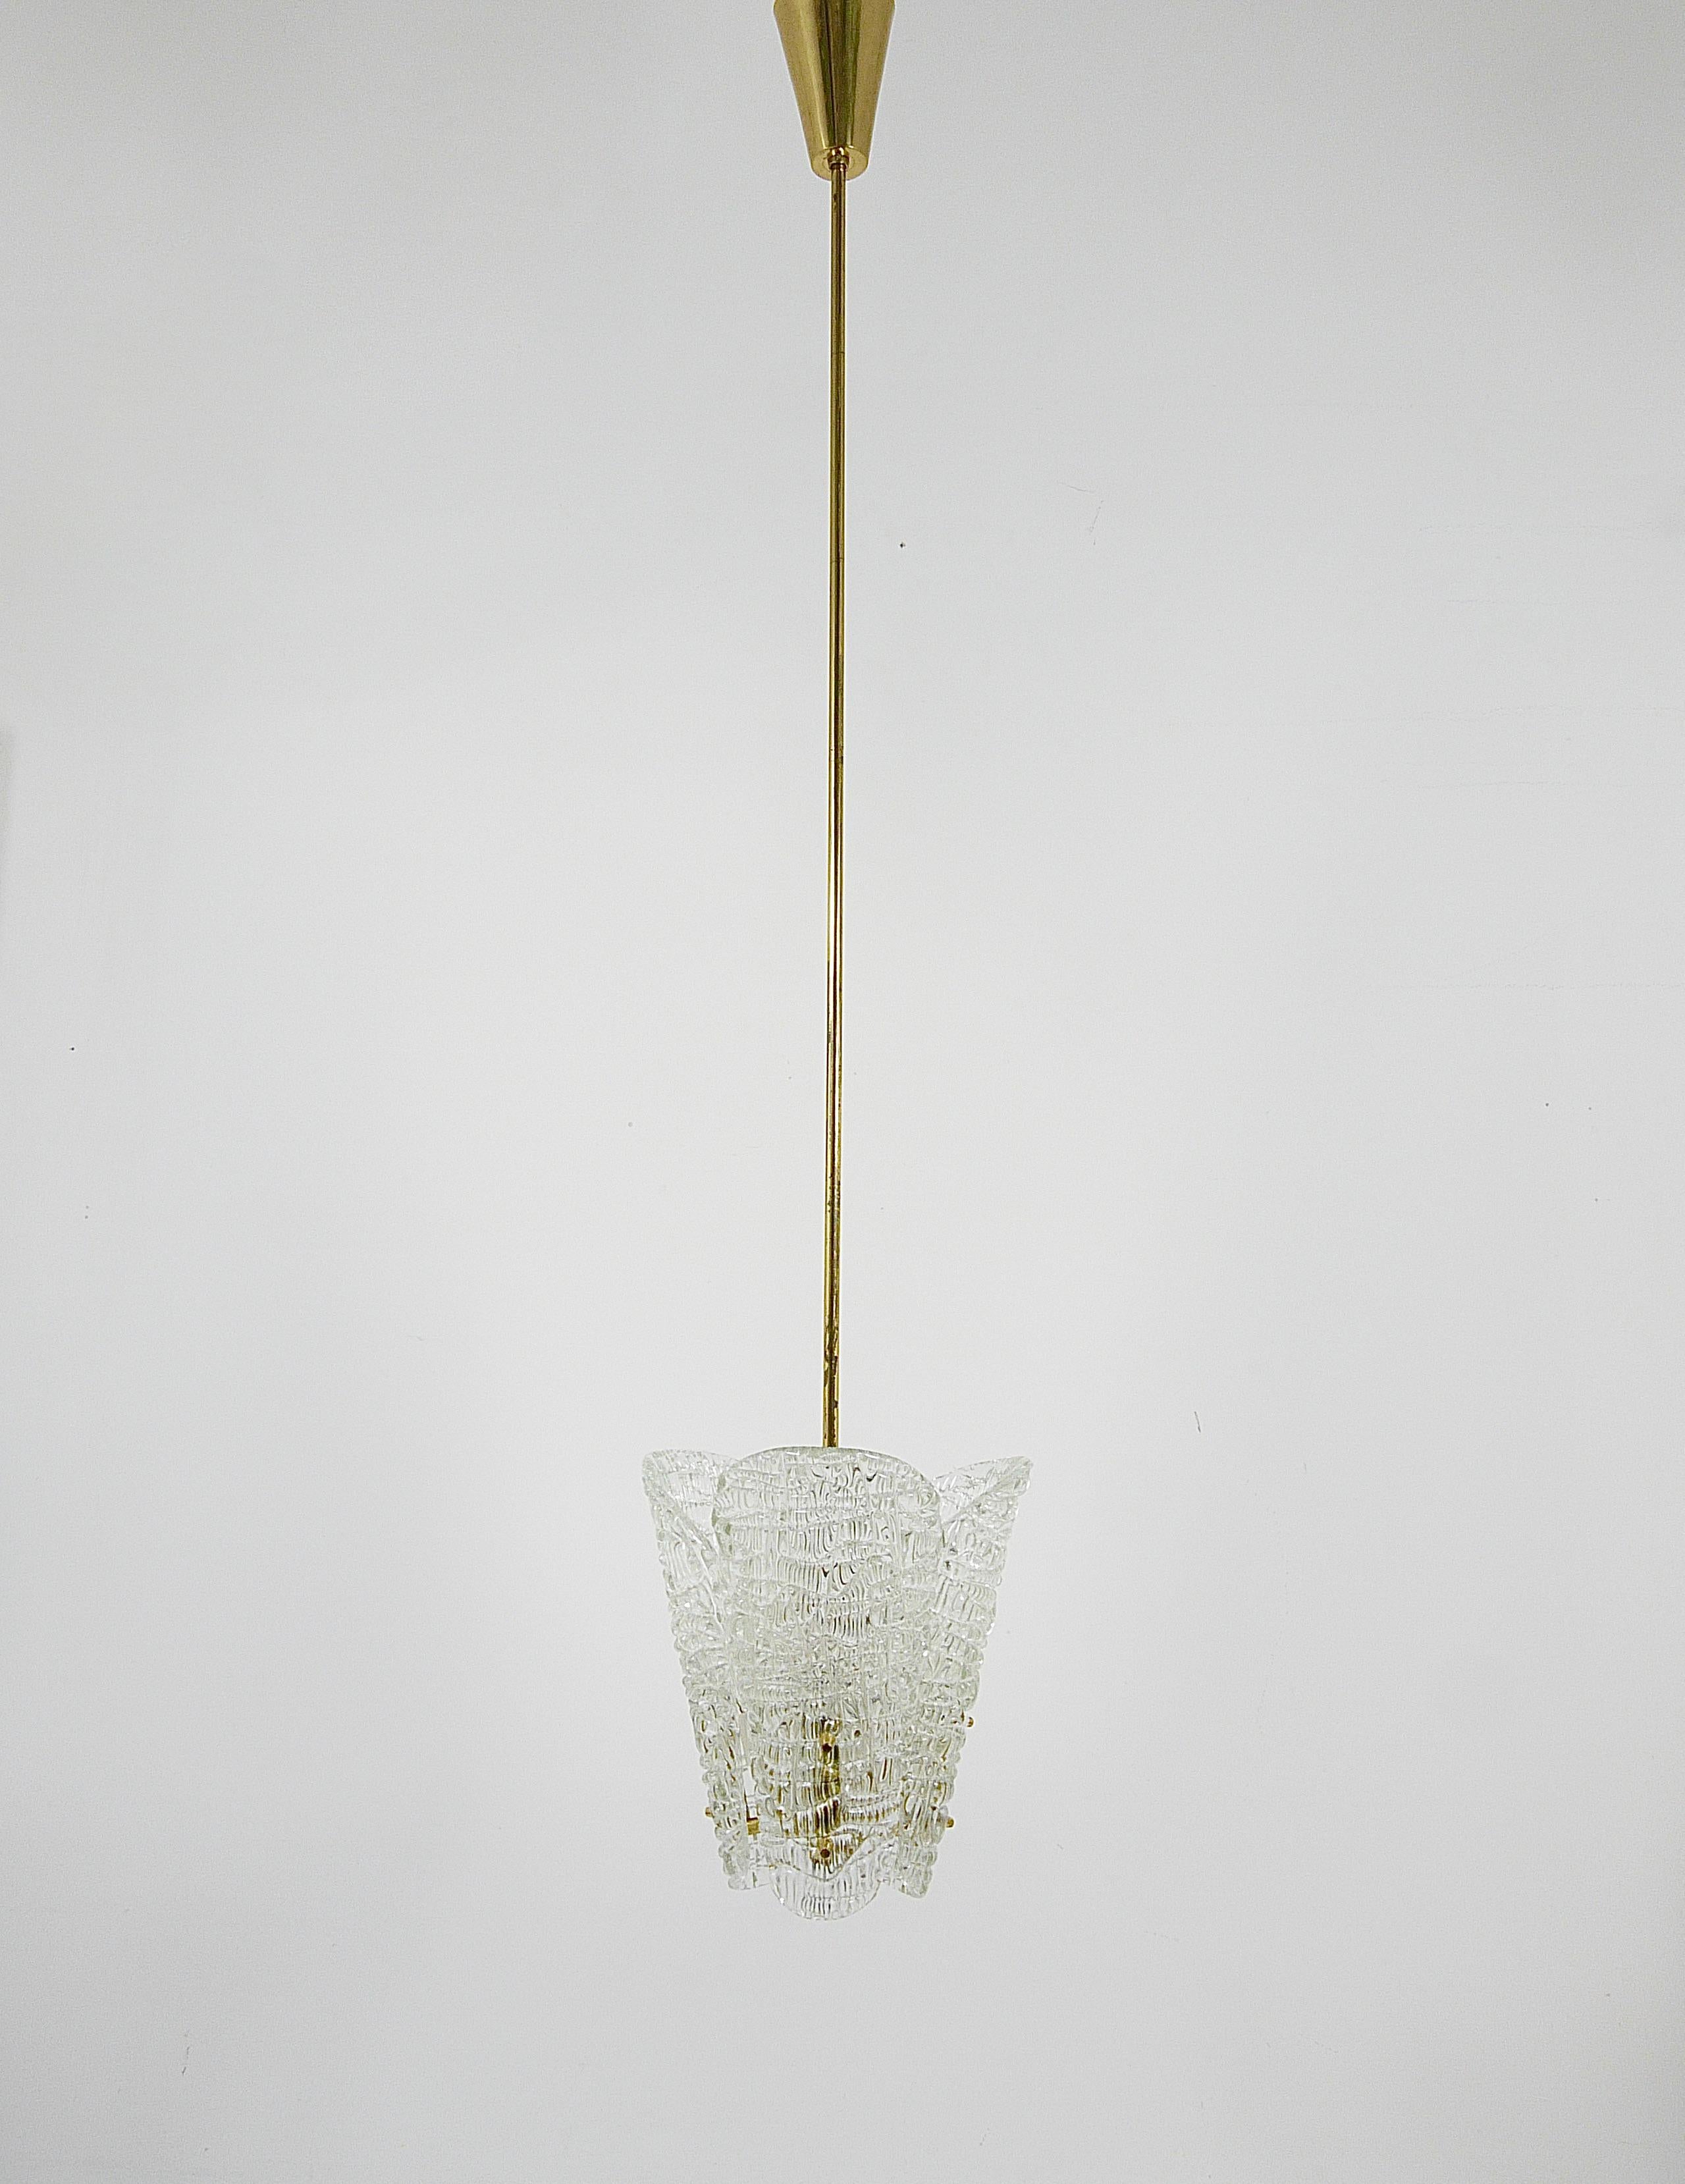 Presenting a charming petite brass chandelier by J.T. Kalmar of Vienna, Austria, crafted in the 1950s. This beautiful piece features three elegantly spoon-shaped, textured glass lampshades gracefully suspended from polished brass hardware. The